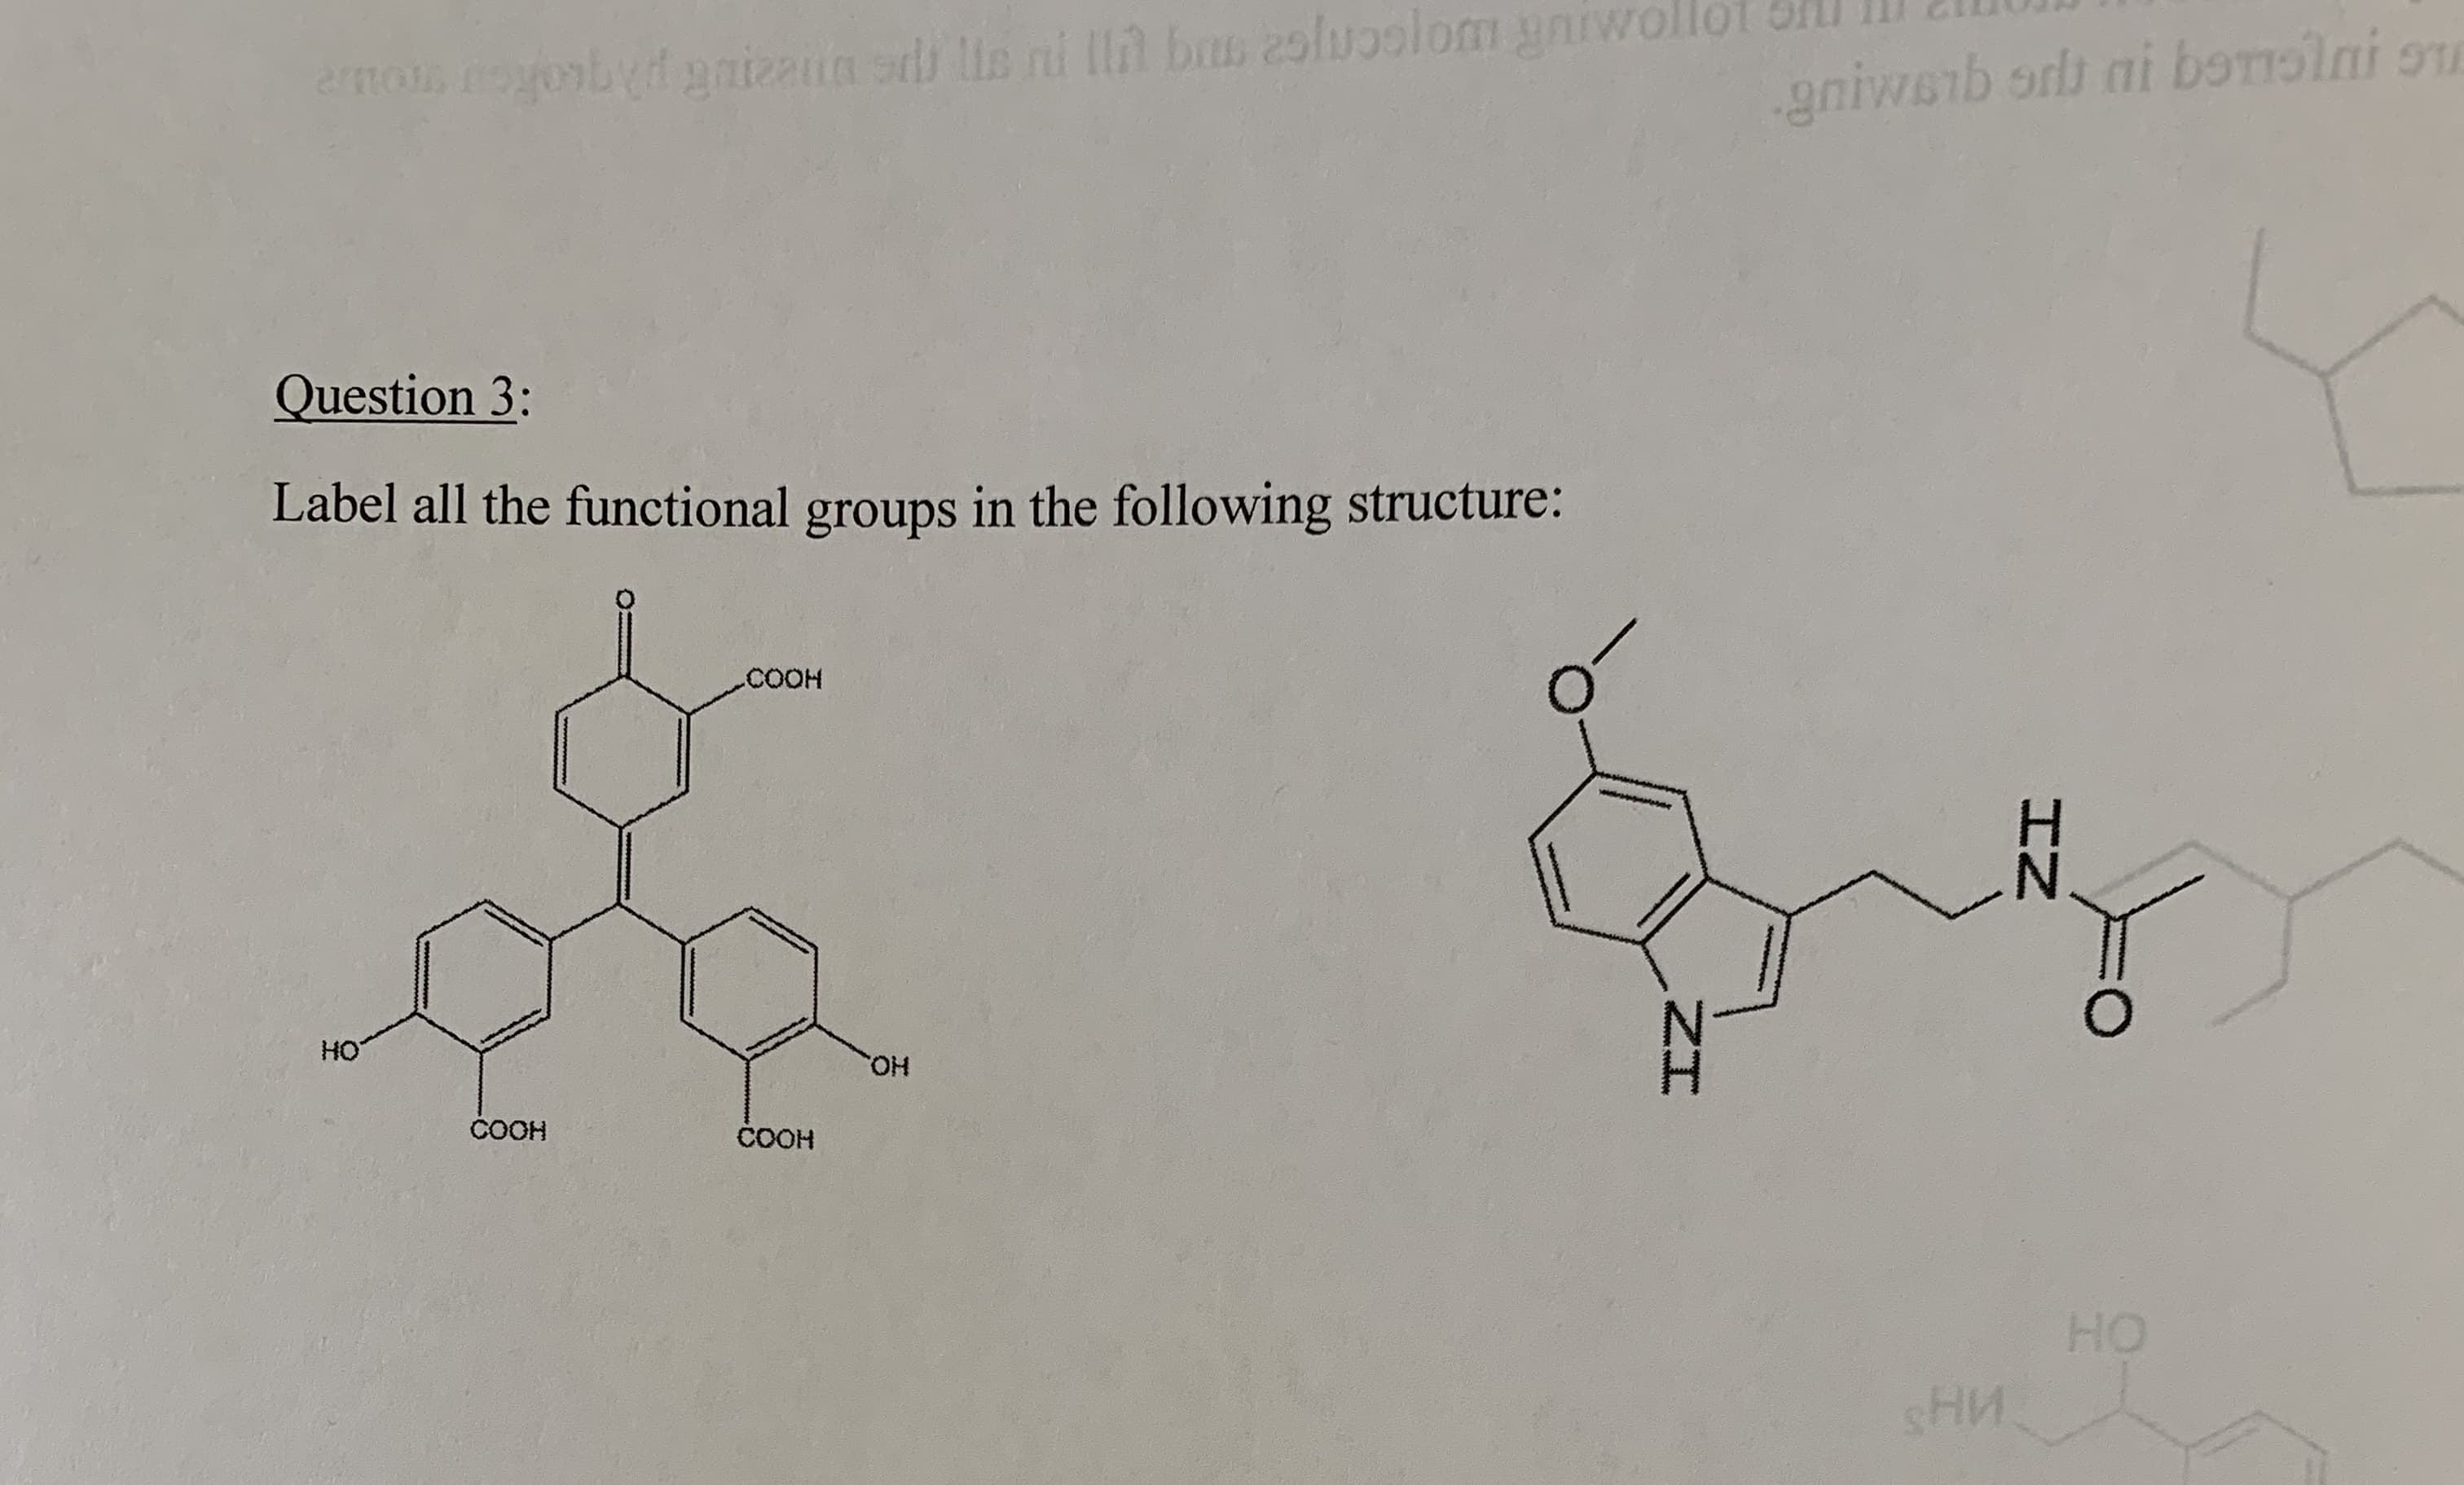 Question 3:
Label all the functional groups in the following structure:
.COOH
HO
HO.
ČOOH
ČOOH
